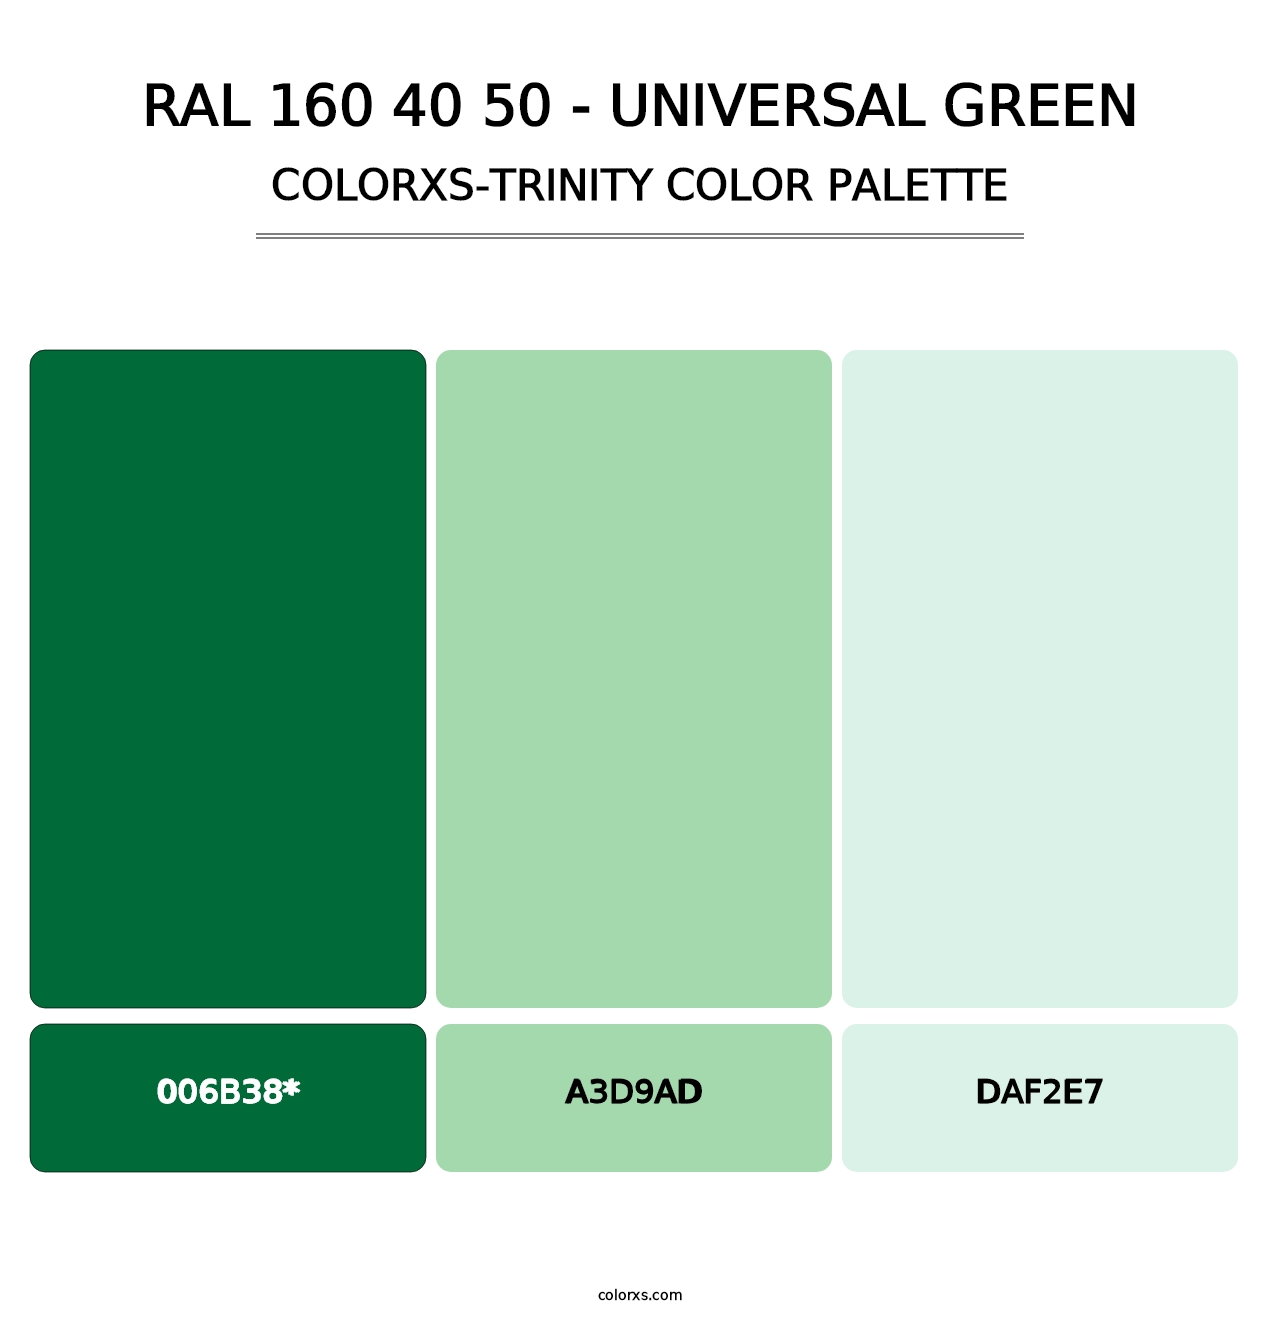 RAL 160 40 50 - Universal Green - Colorxs Trinity Palette